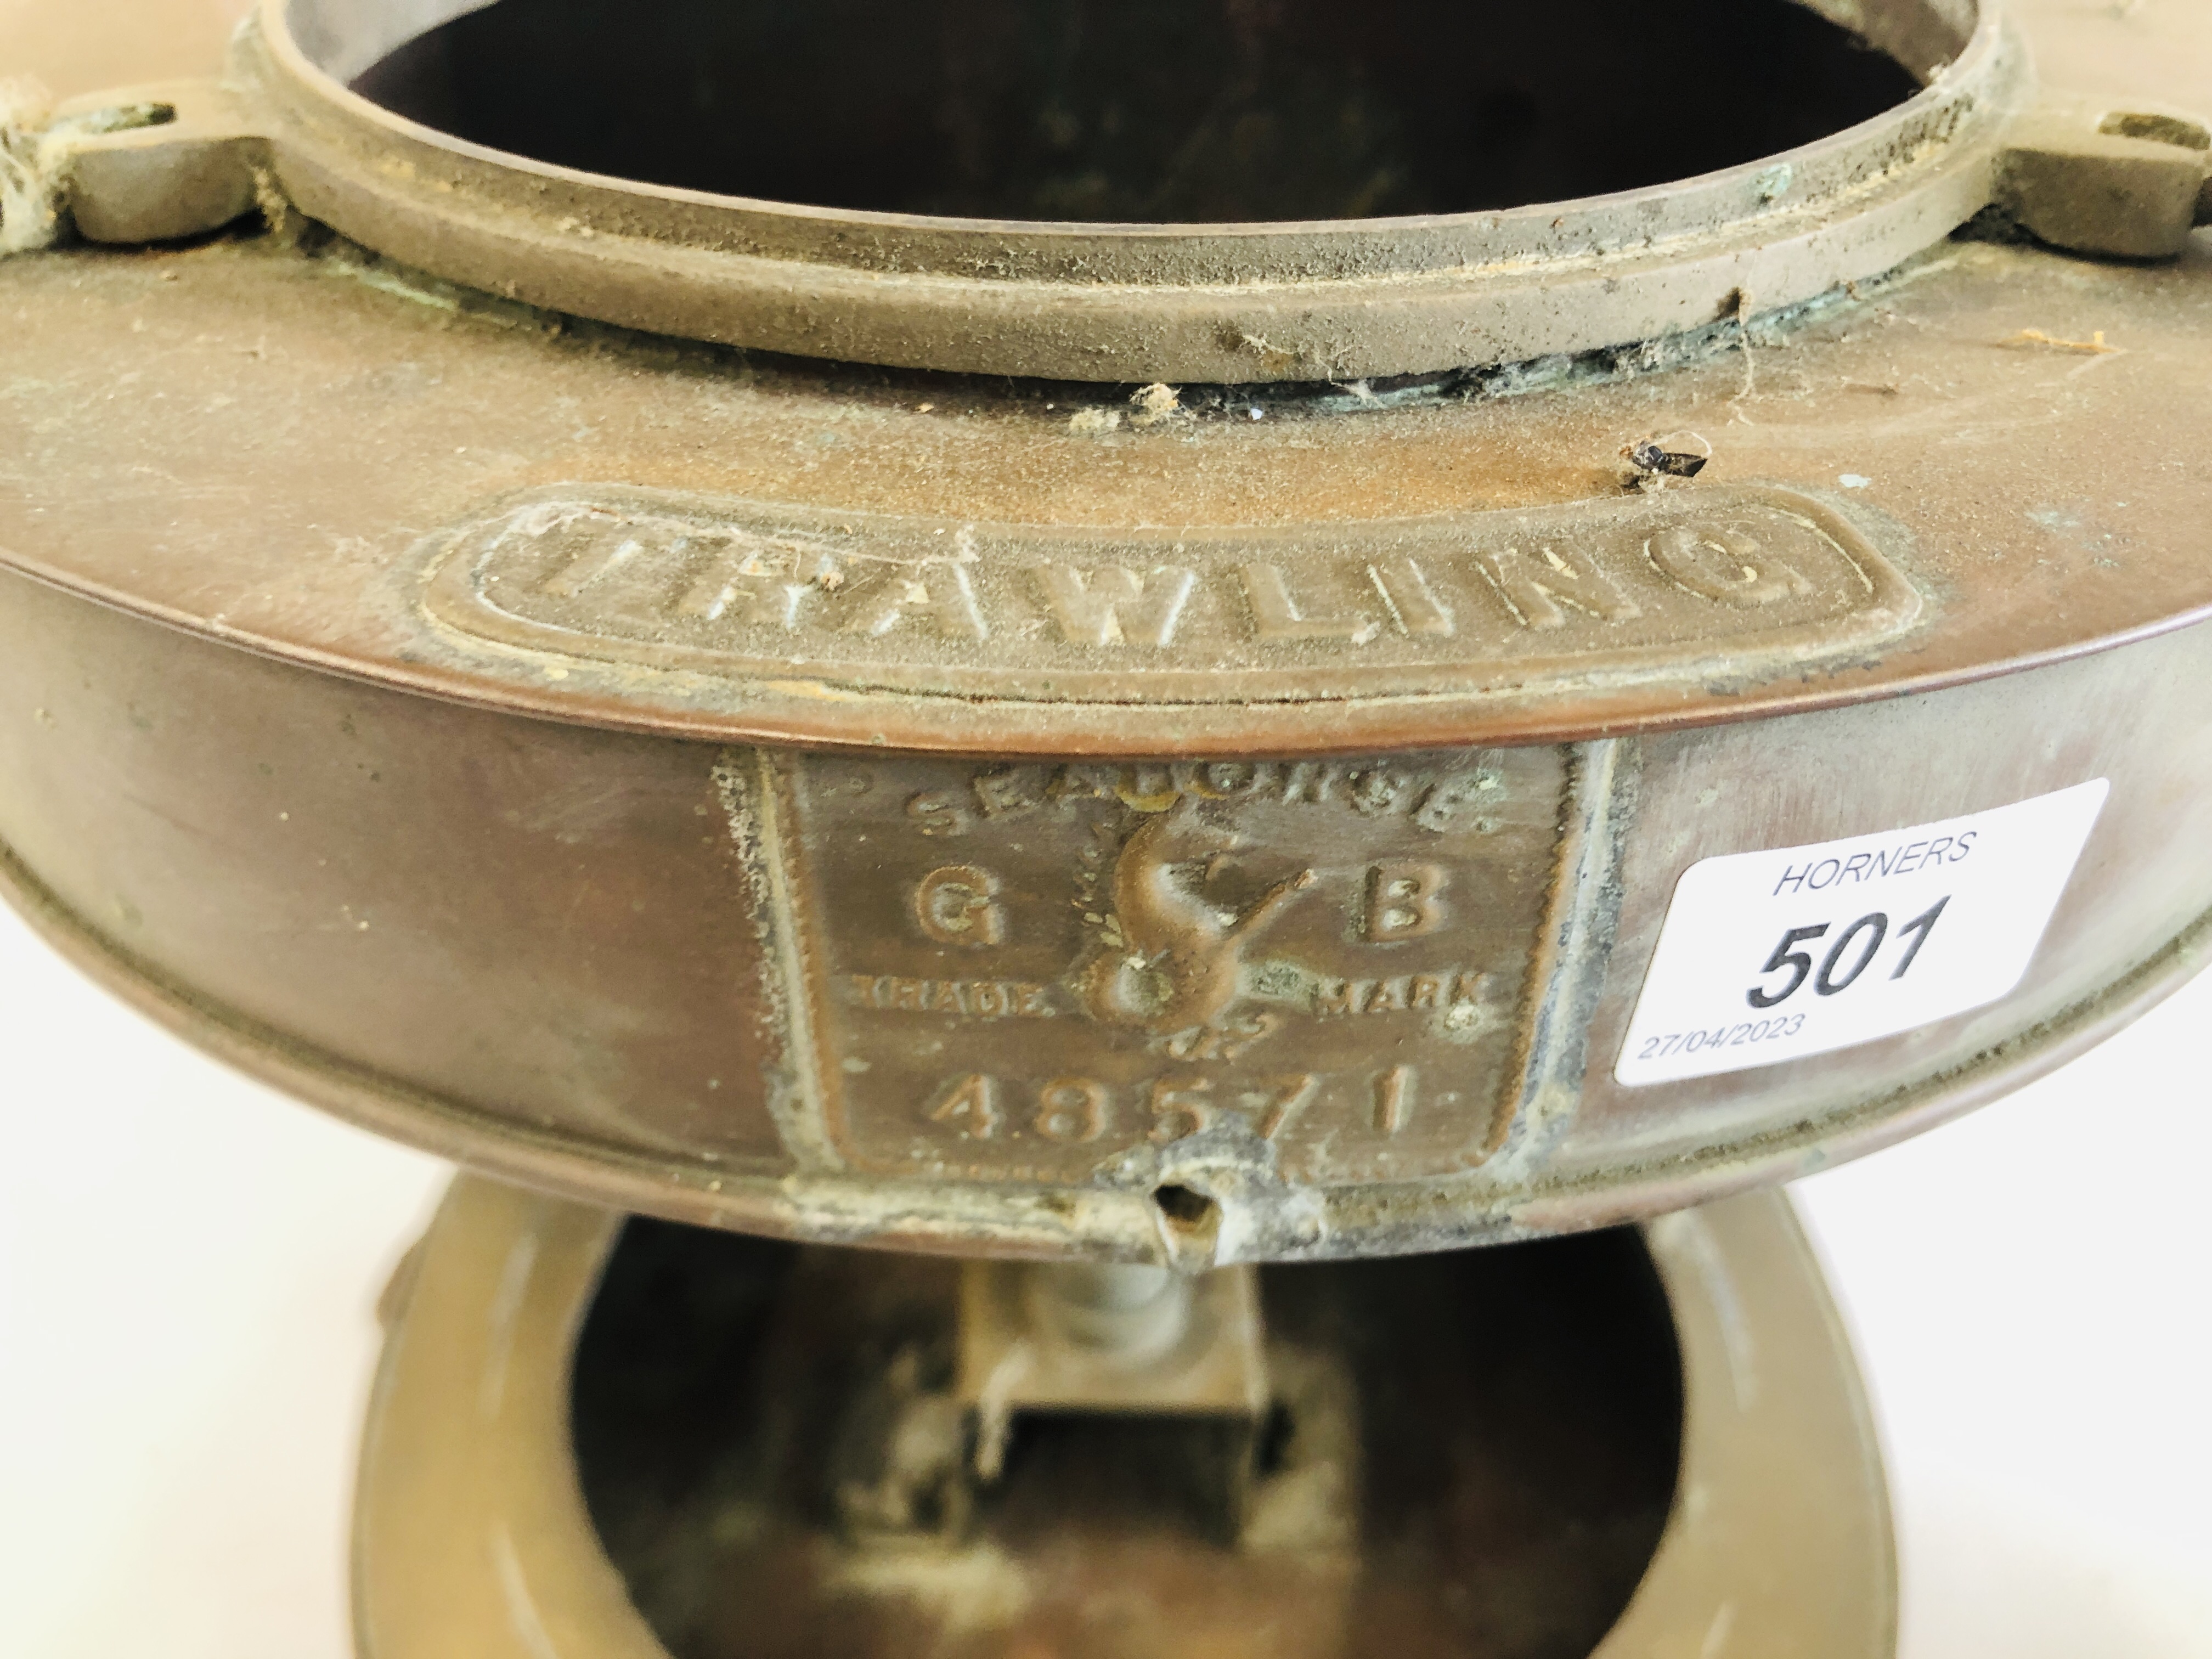 A COPPER TRAWLING LAMP LABELLED "SEAHORSE GB 48571" A/F ALONG WITH A VINTAGE COPPER WARMER. - Image 3 of 6